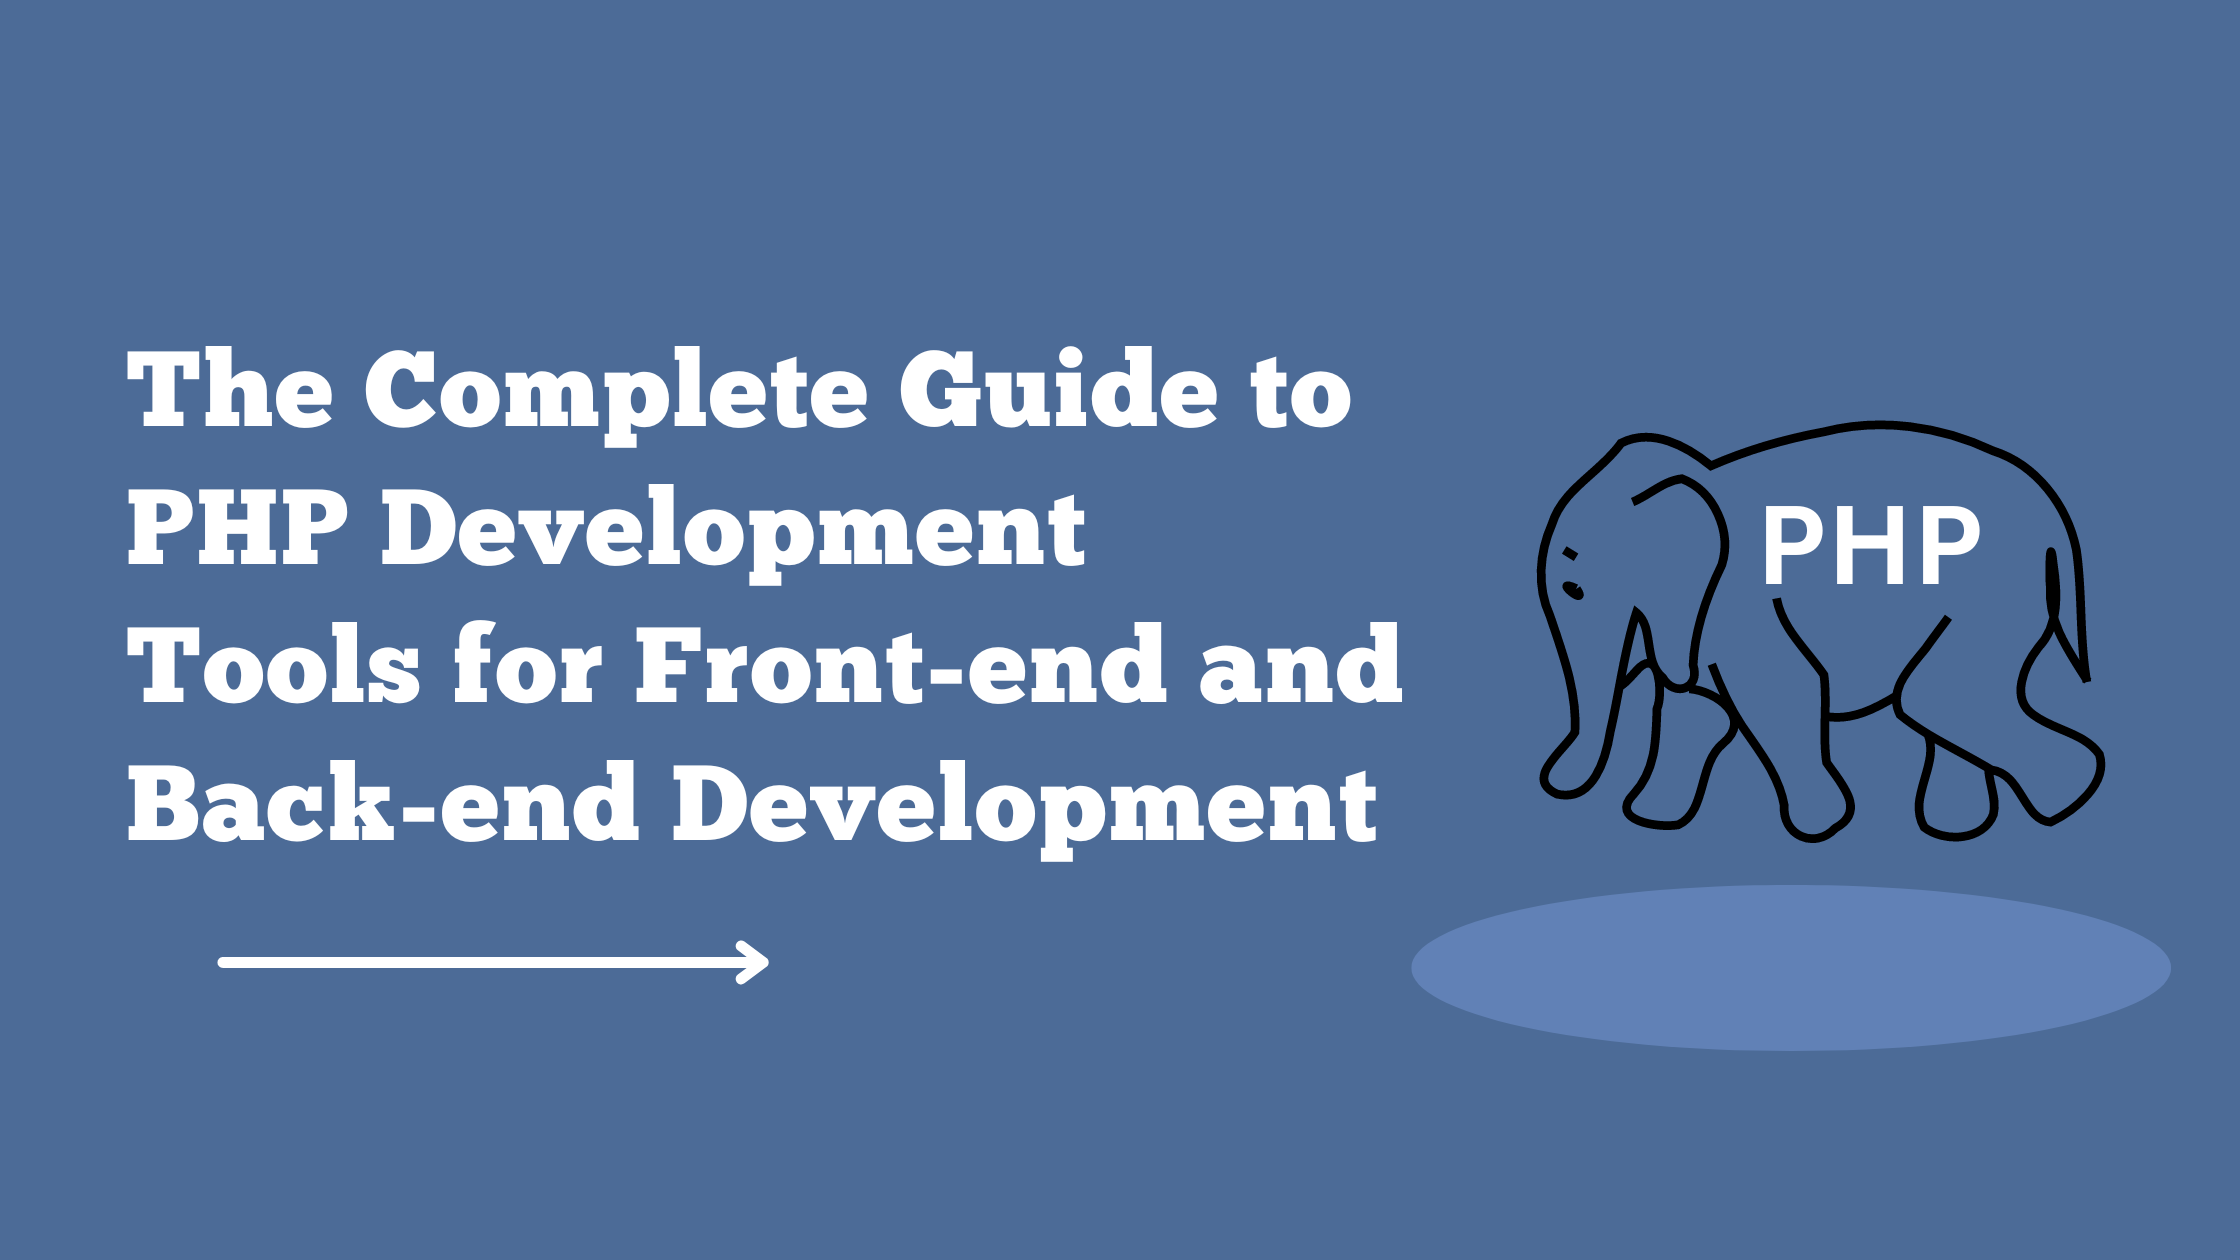 The Complete Guide to PHP Development Tools for Front-end and Back-end Development